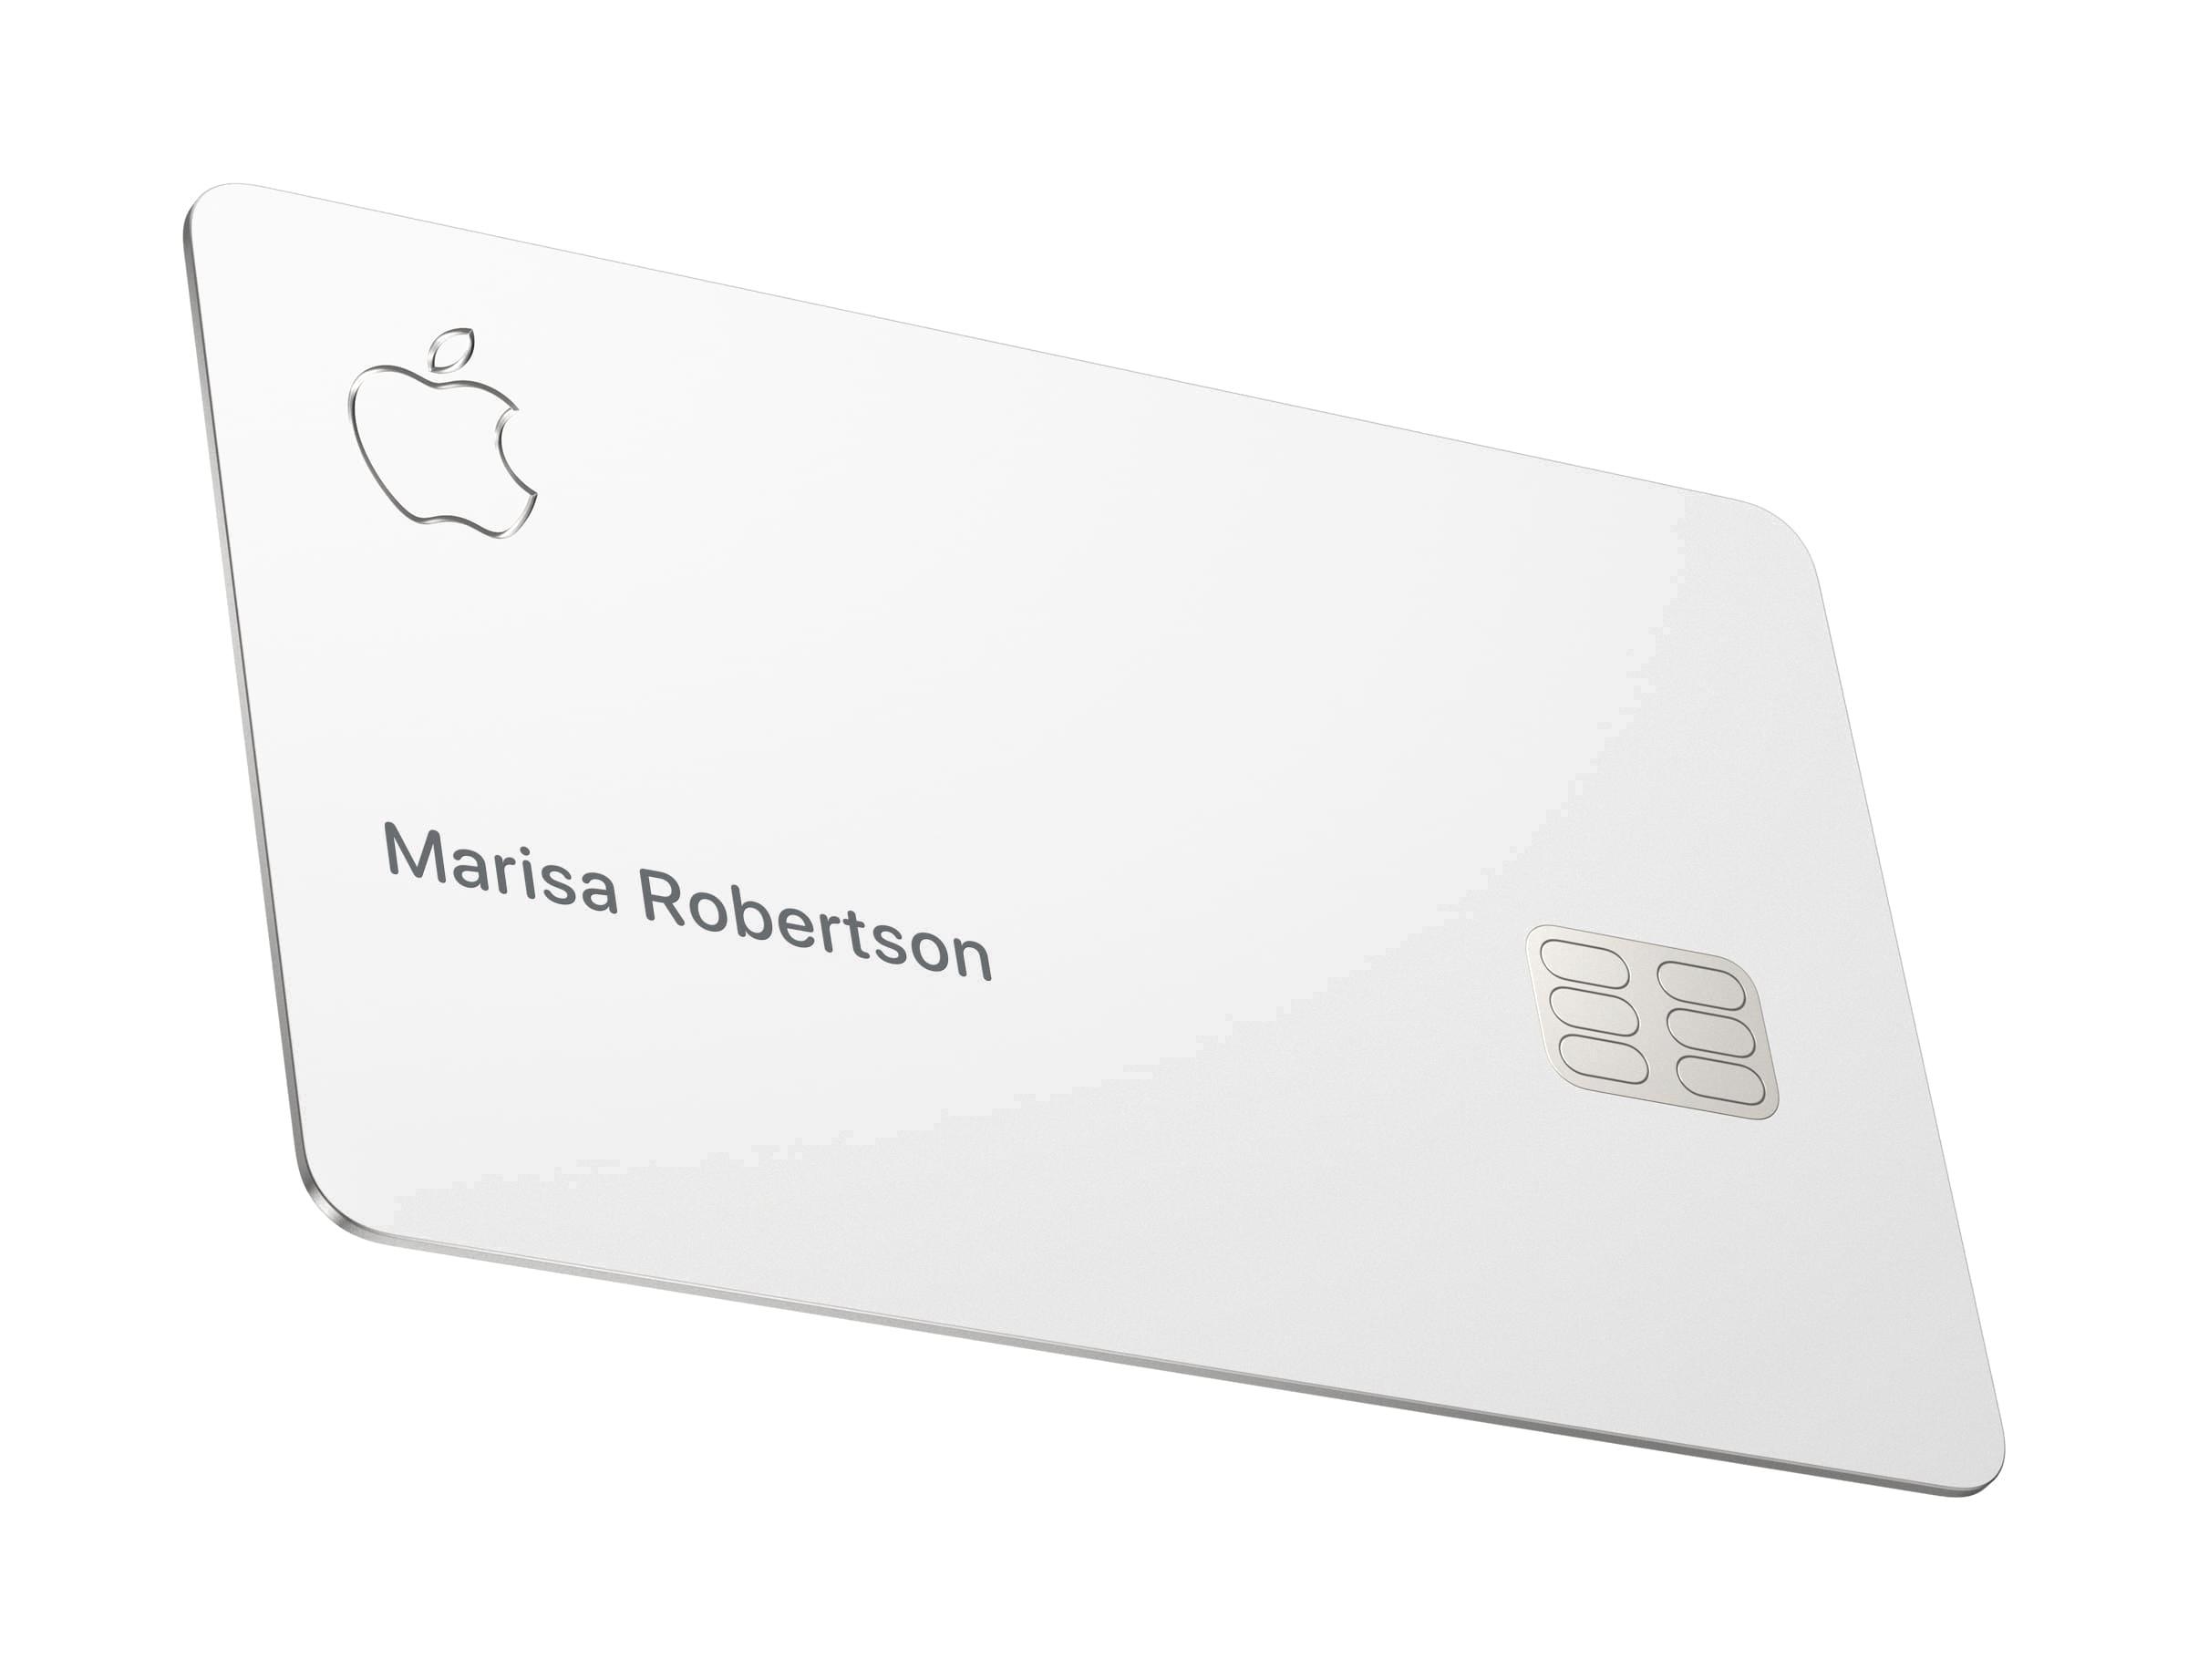 your apple card application is being reviewed